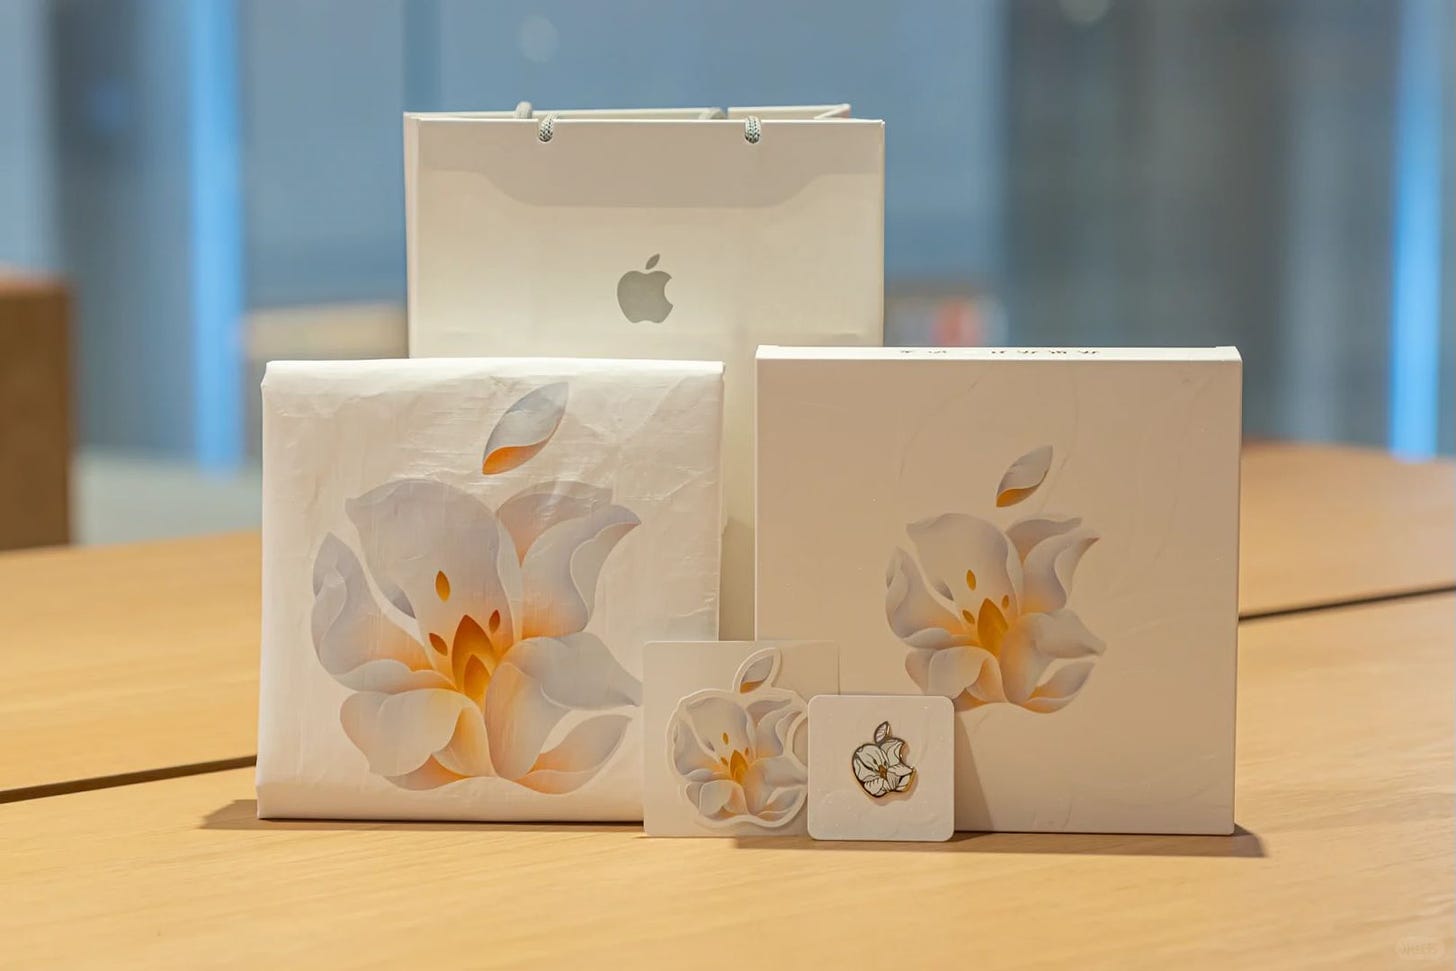 A tote bag and pin featuring the Apple Jing'an logo.